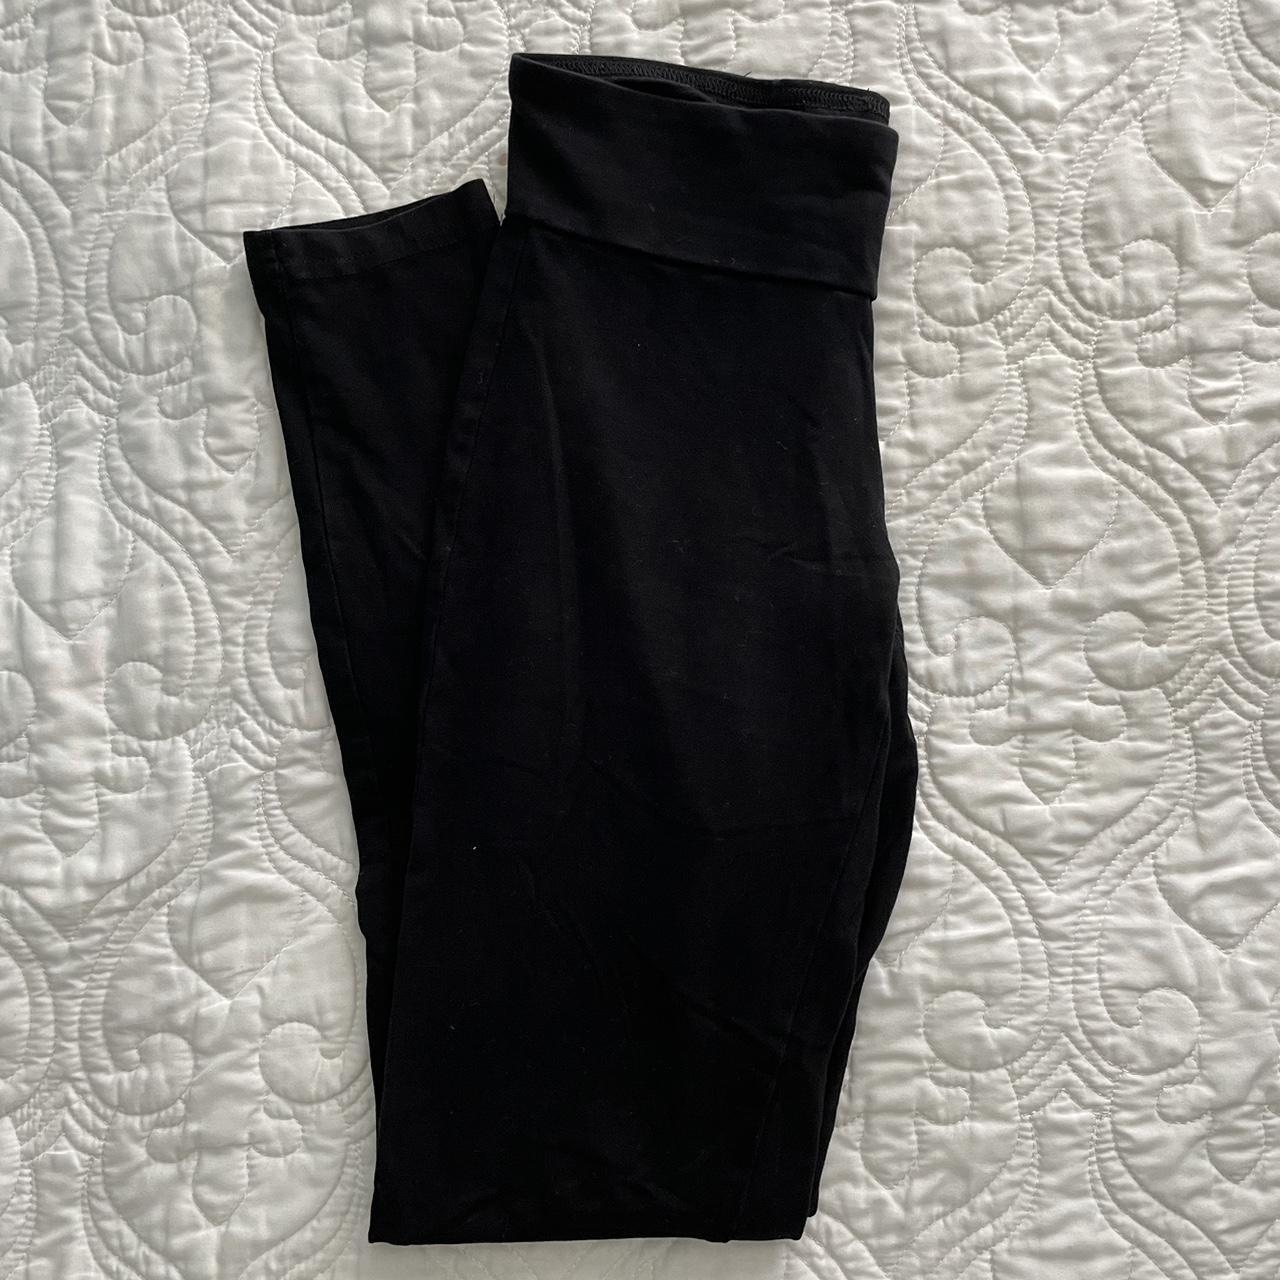 Abound Leggings Size Small Worn once or twice, no - Depop